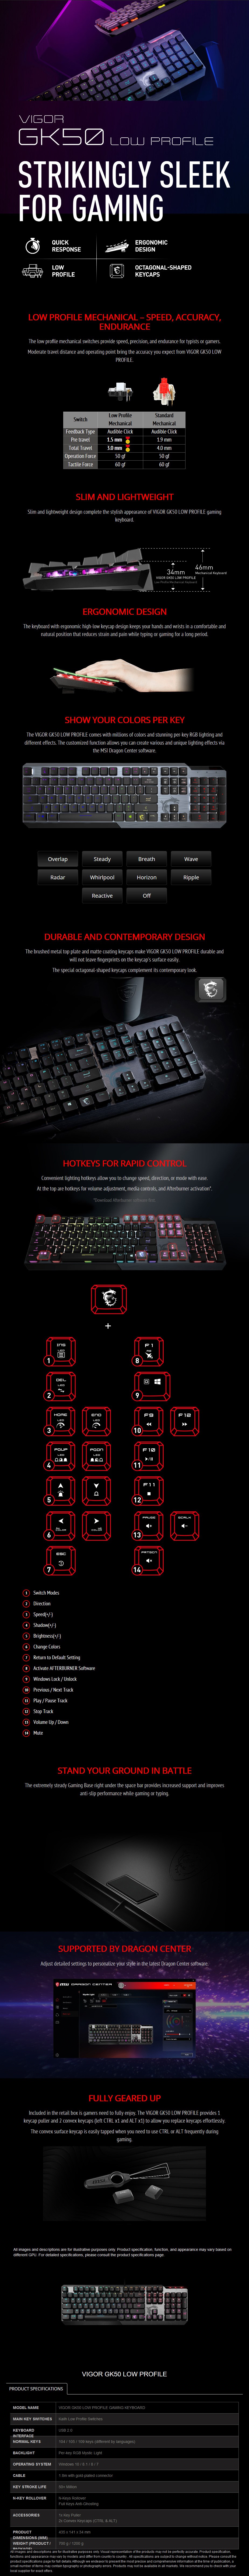 A large marketing image providing additional information about the product MSI Vigor GK50 Kailh Low Profile Mechnical Gaming Keyboard - Additional alt info not provided